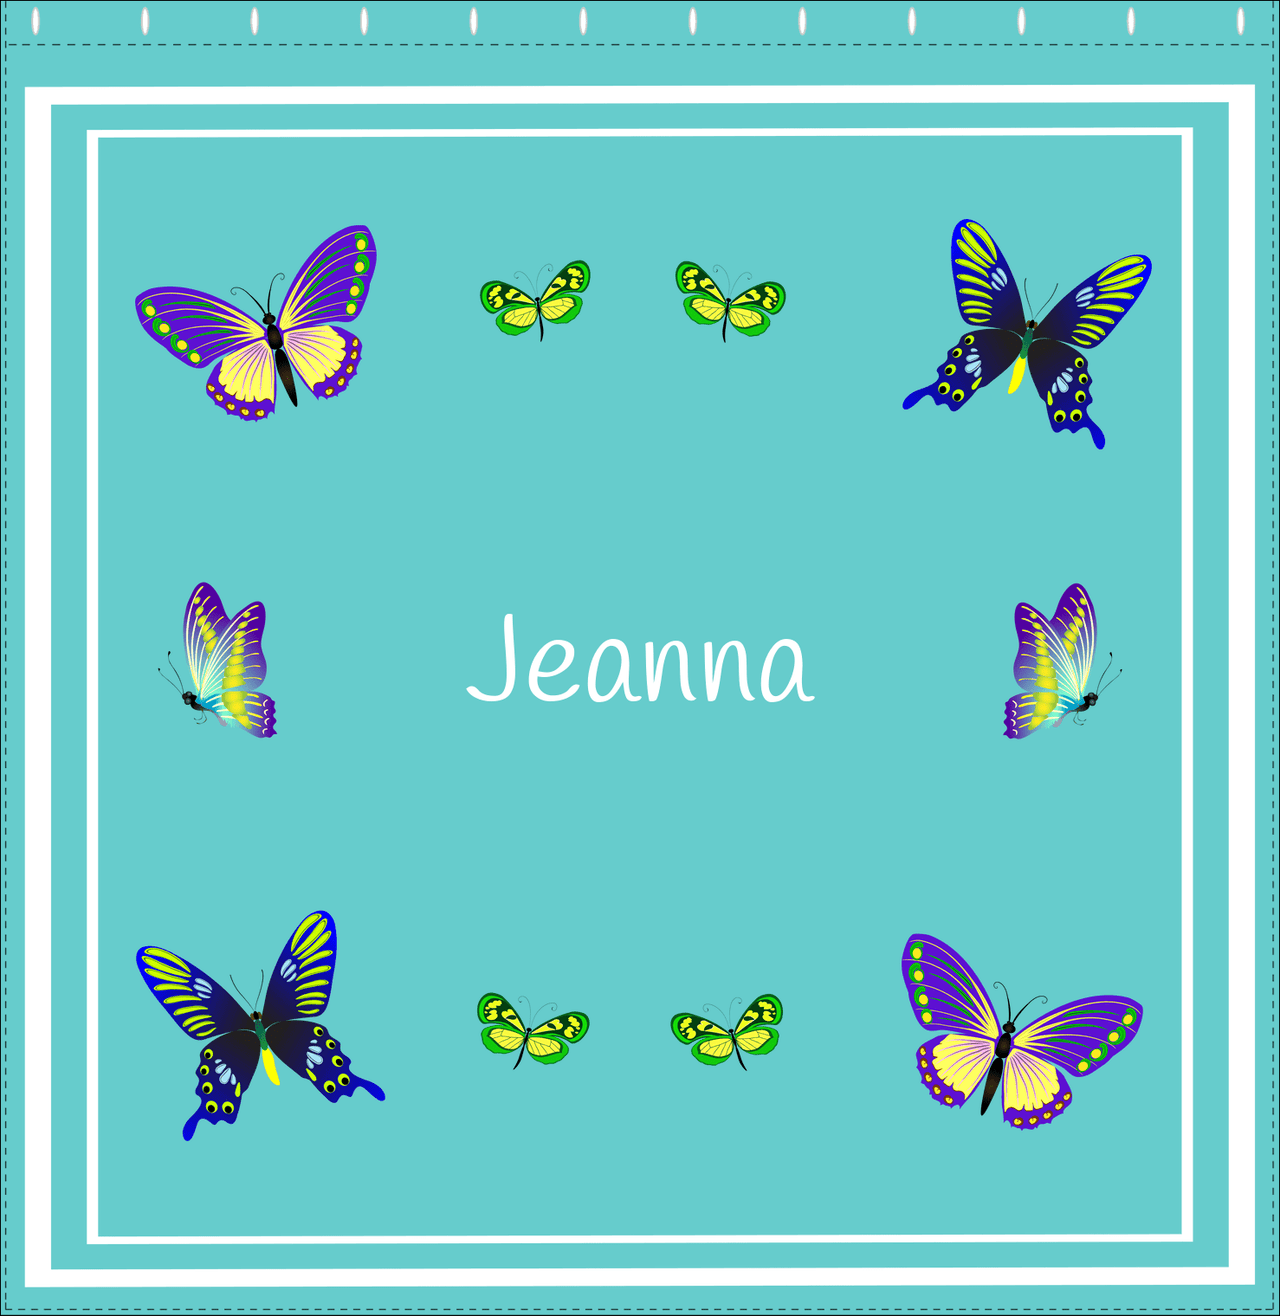 Personalized Butterfly Shower Curtain VIII - Teal Background - Butterflies II - Decorate View